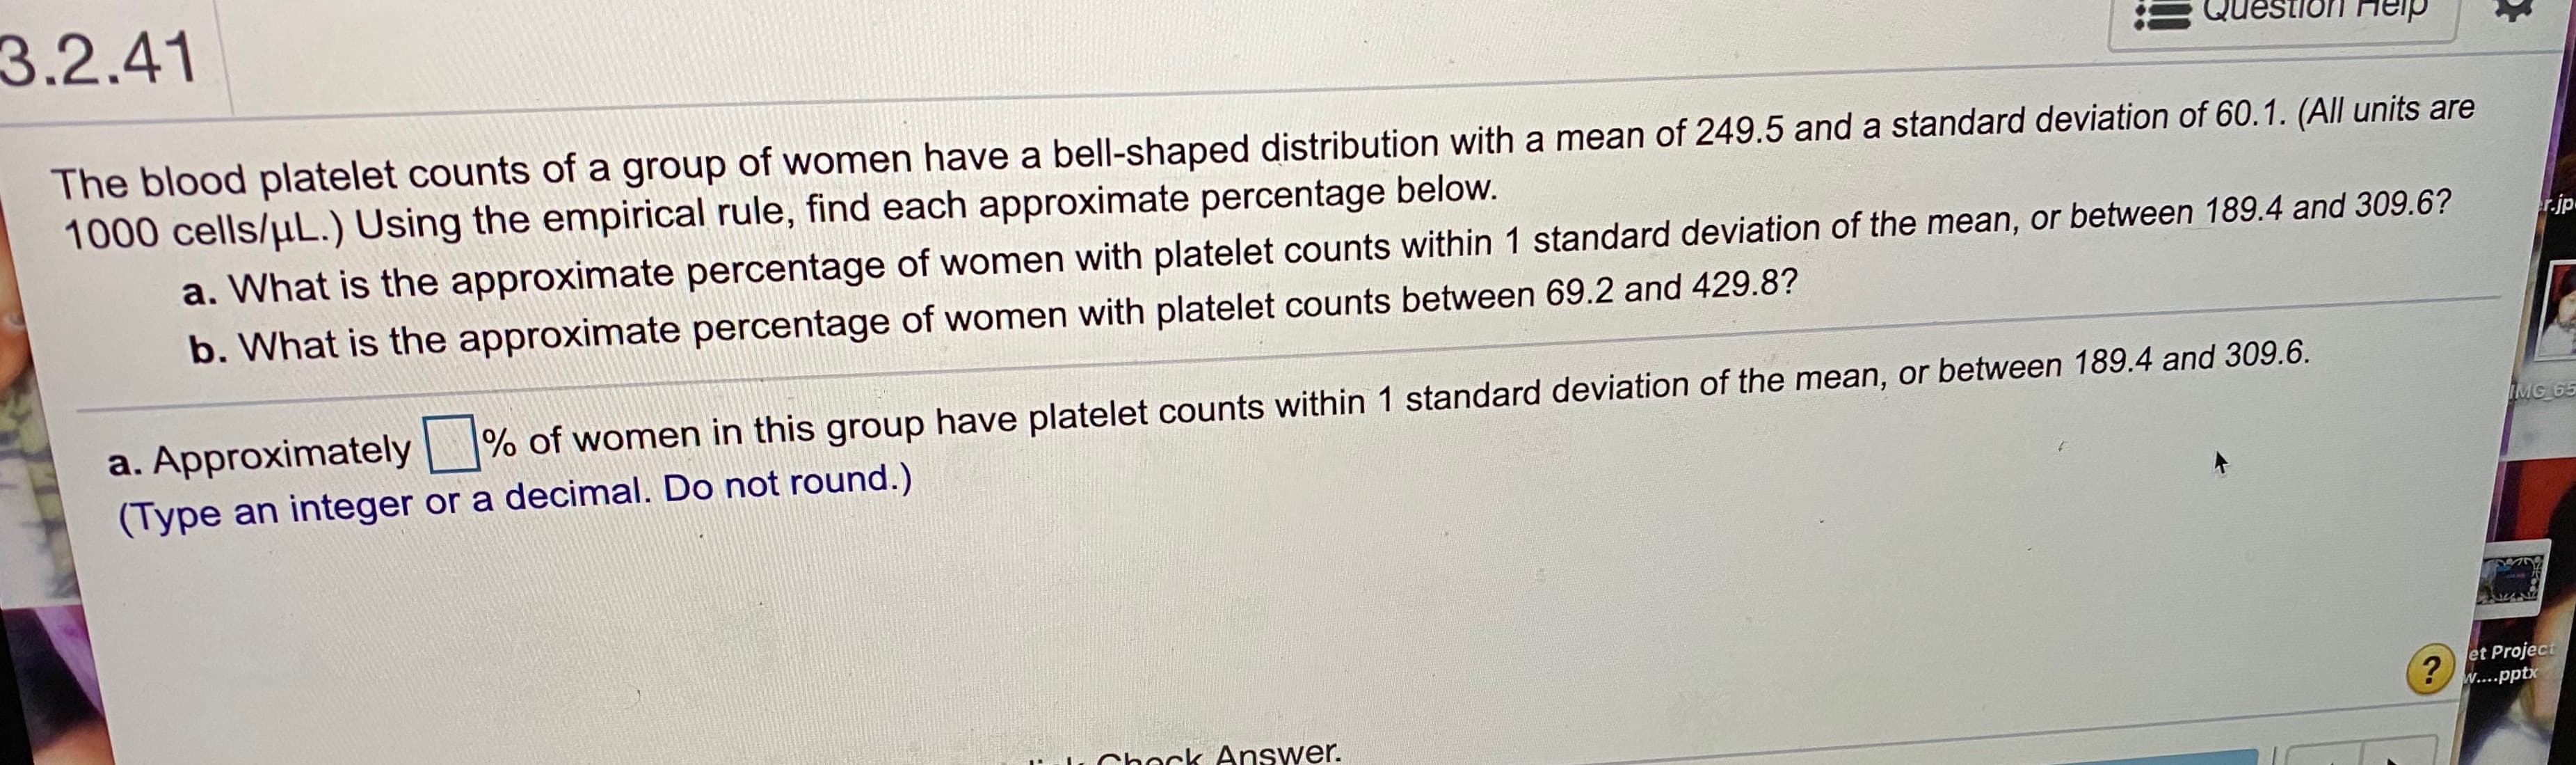 3.2.41
Question Heip
пер
The blood platelet counts of a group of women have a bell-shaped distribution with a mean of 249.5 and a standard deviation of 60.1. (All units are
1000 cells/µL.) Using the empirical rule, find each approximate percentage below.
a. What is the approximate percentage of women with platelet counts within 1 standard deviation of the mean, or between 189.4 and 309.6?
r.jp
b. What is the approximate percentage of women with platelet counts between 69.2 and 429.8?
a. Approximately
% of women in this group have platelet counts within 1 standard deviation of the mean, or between 189.4 and 309.6.
IMG 65
(Type an integer or a decimal. Do not round.)
et Project
w....pptx
Chock Answer.
